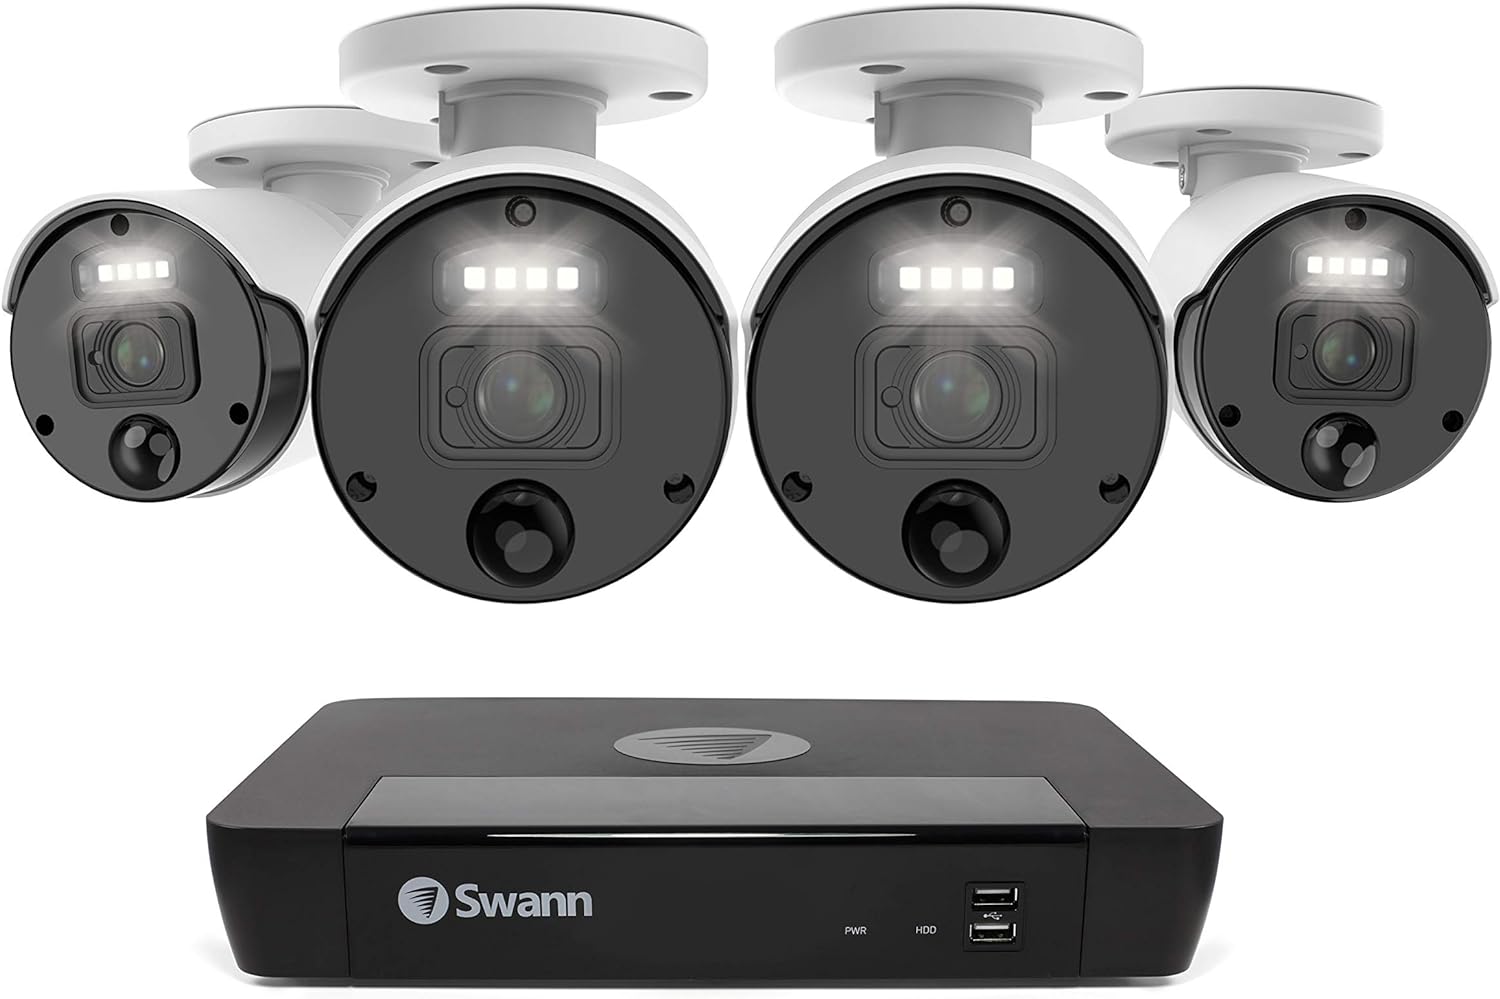 How to Choose the Best Microphone for Swann Security Cameras